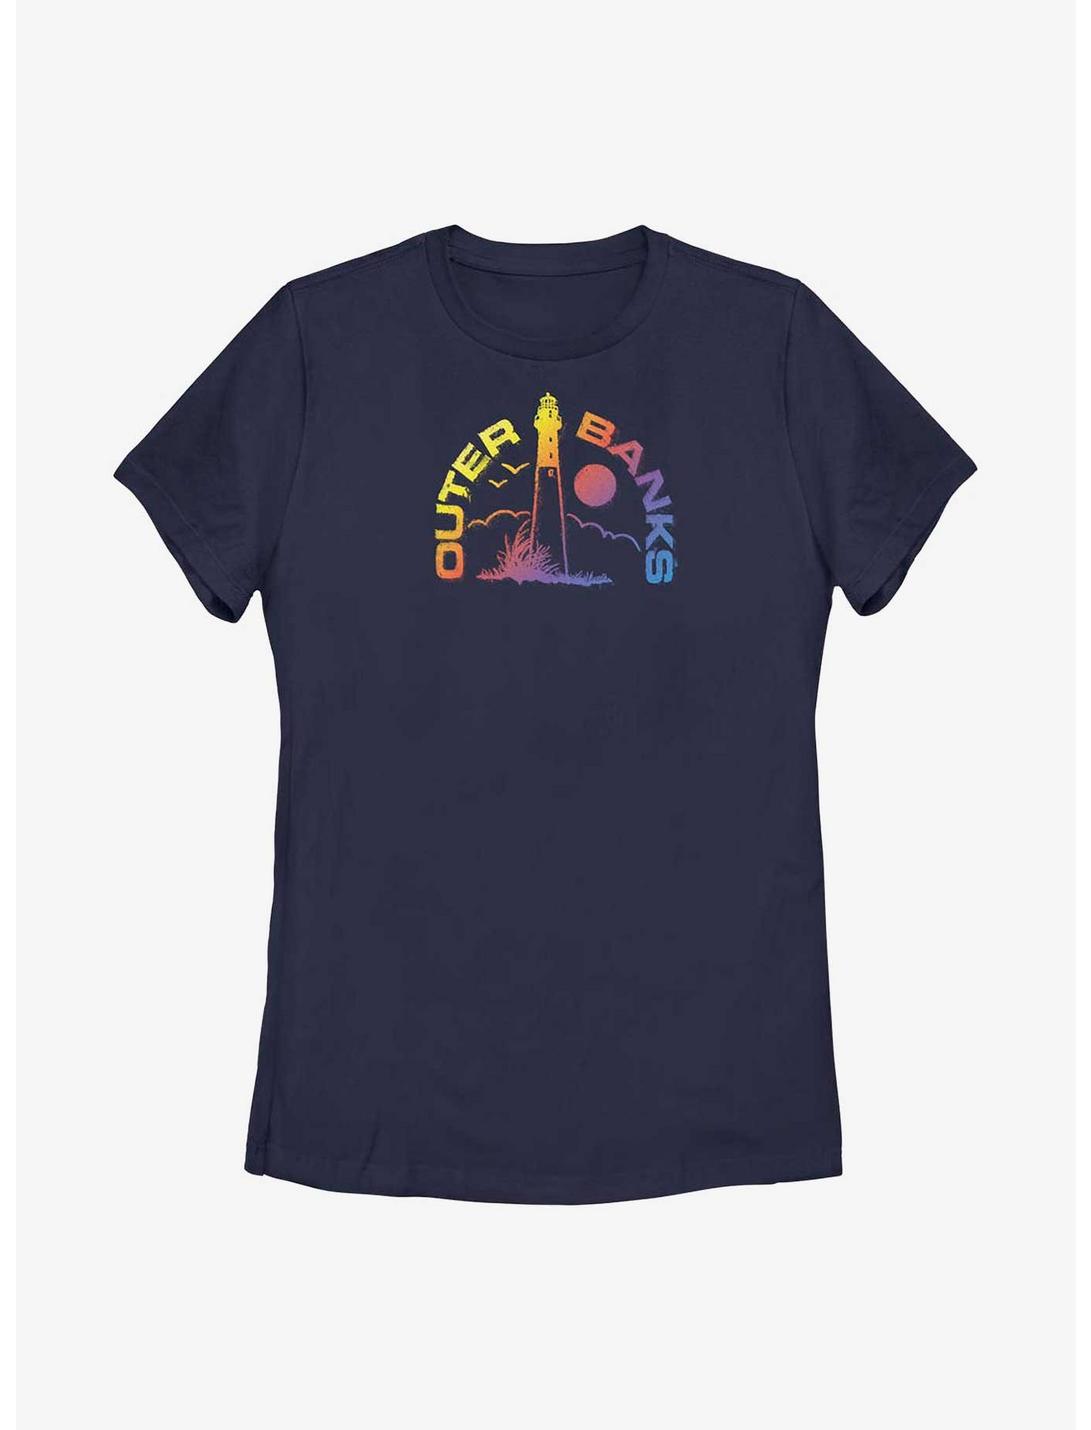 Outer Banks Lighthouse Gradient Logo Womens T-Shirt, NAVY, hi-res